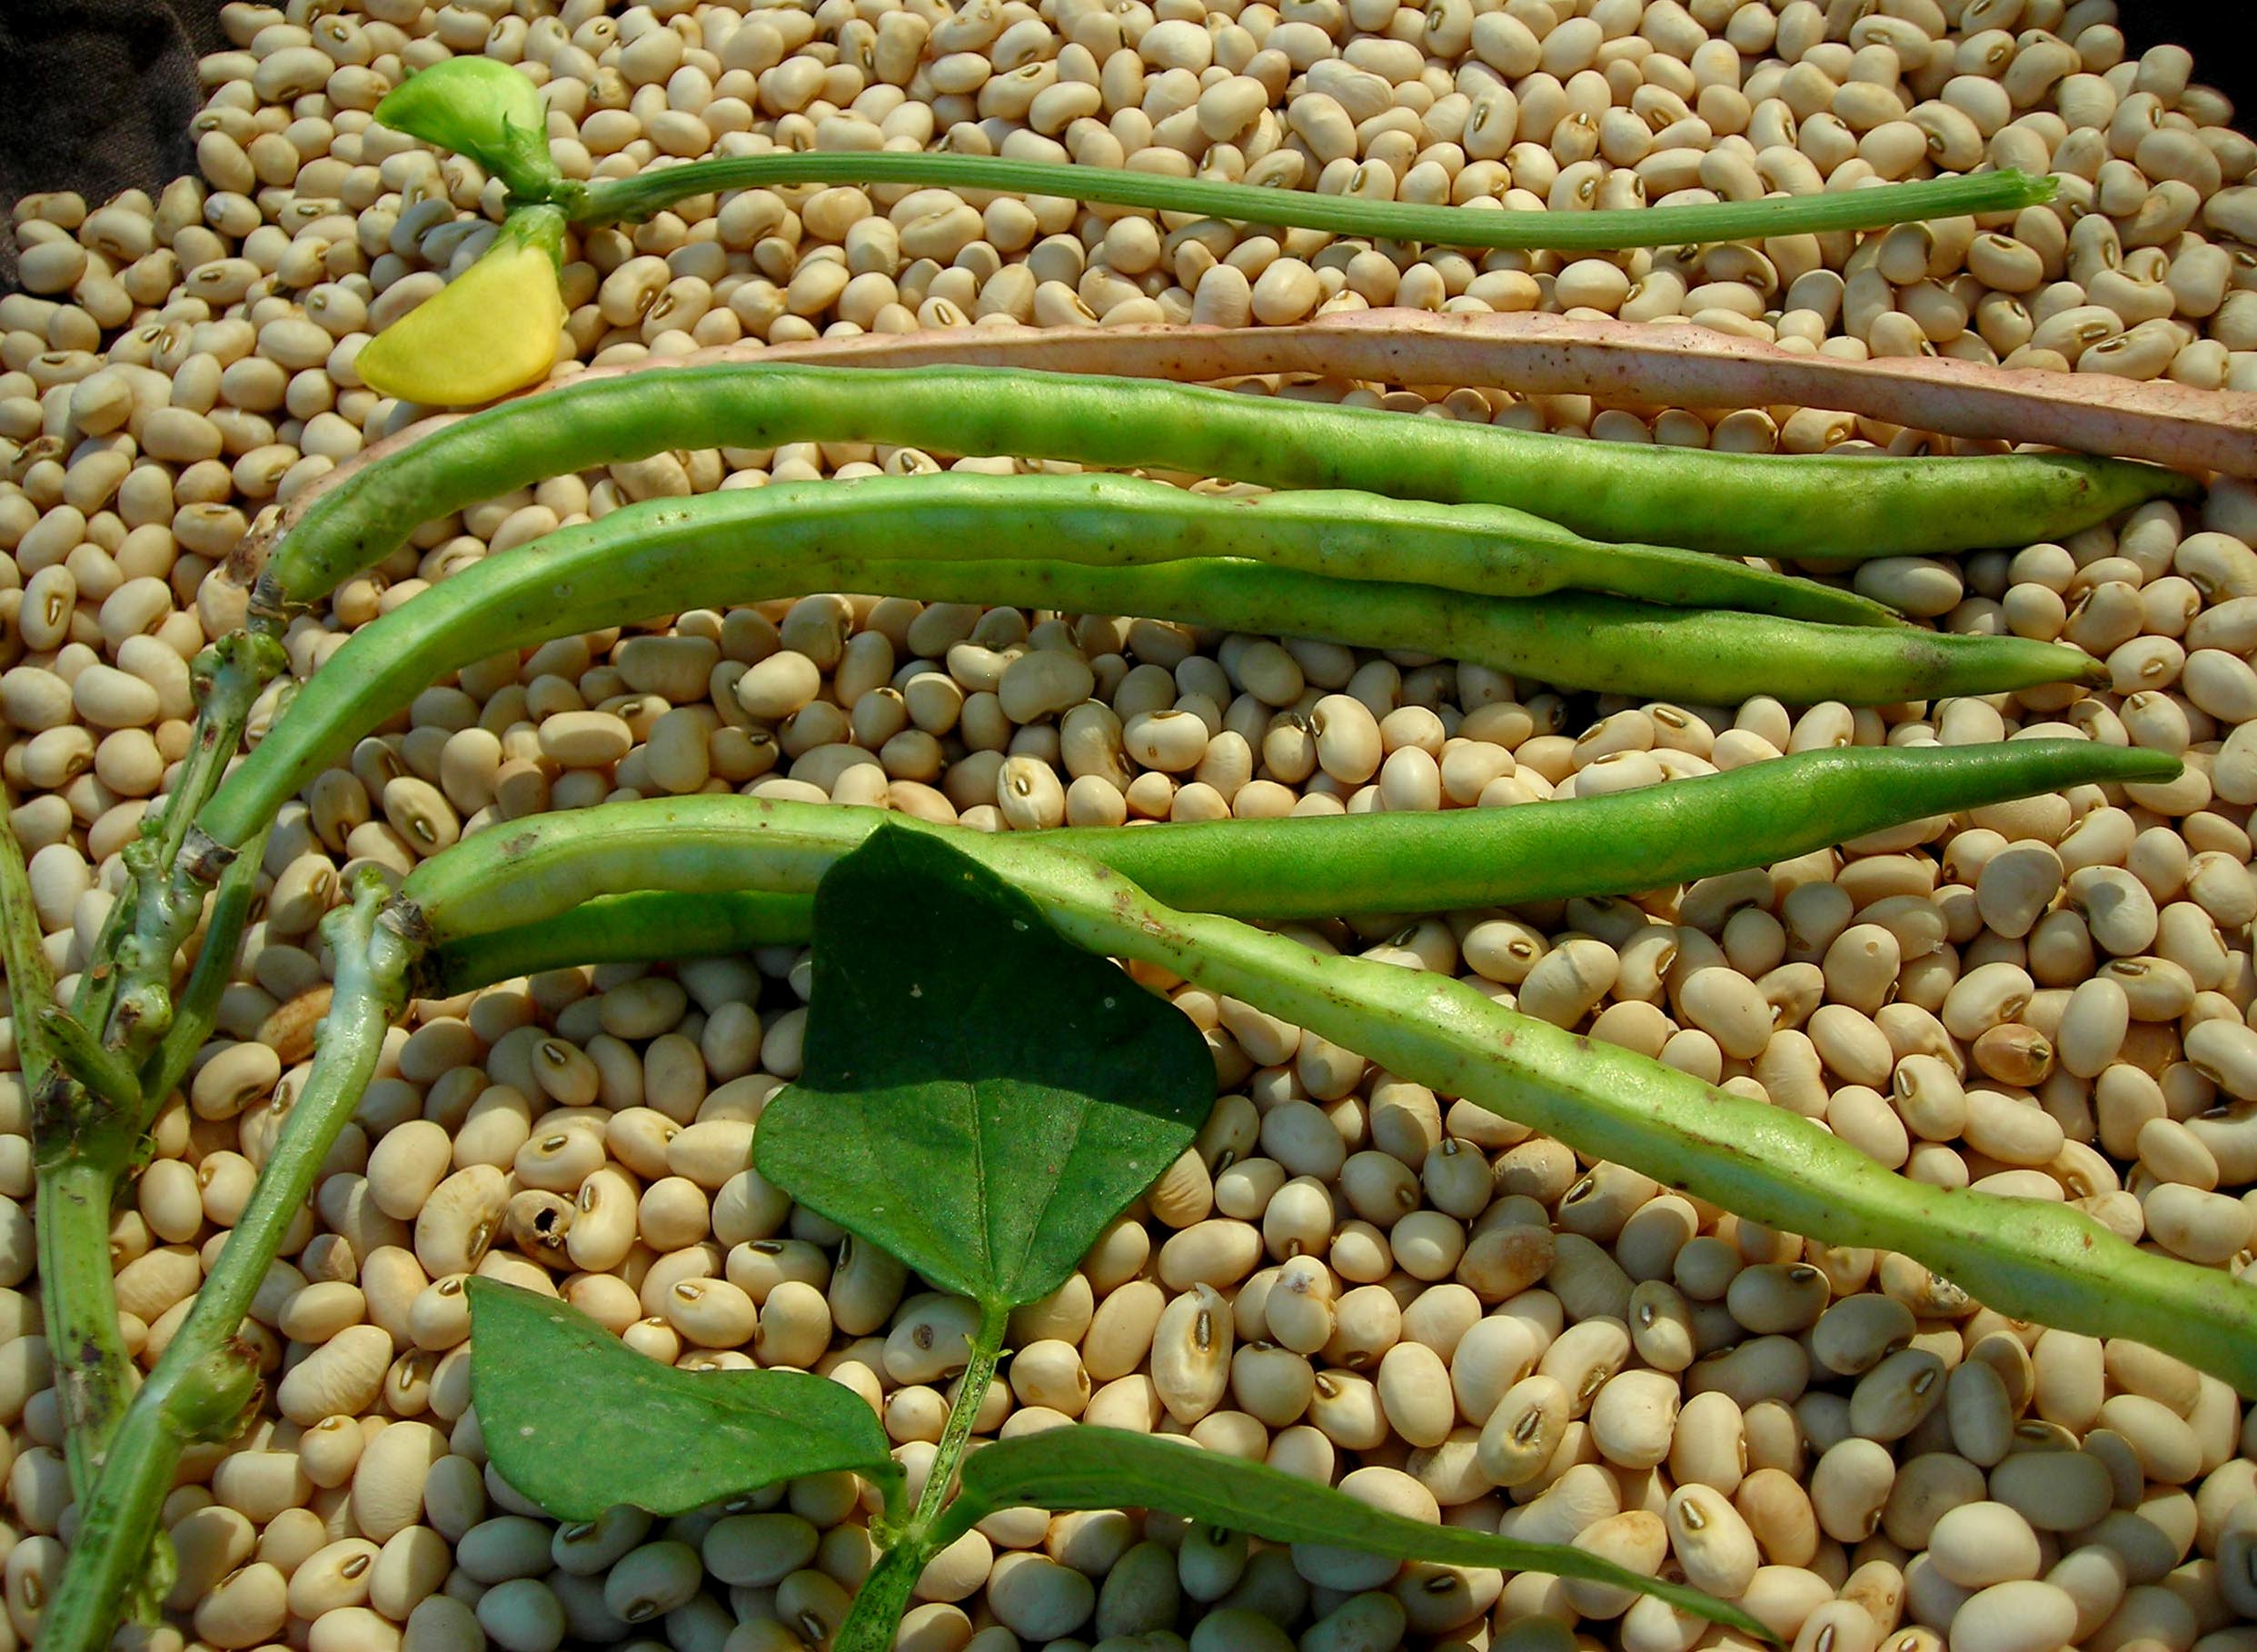 Fast Lady Northern Southern Pea (Cowpea), 28 g [16124] $2.75 : Southern Exposure Seed ...2484 x 1818